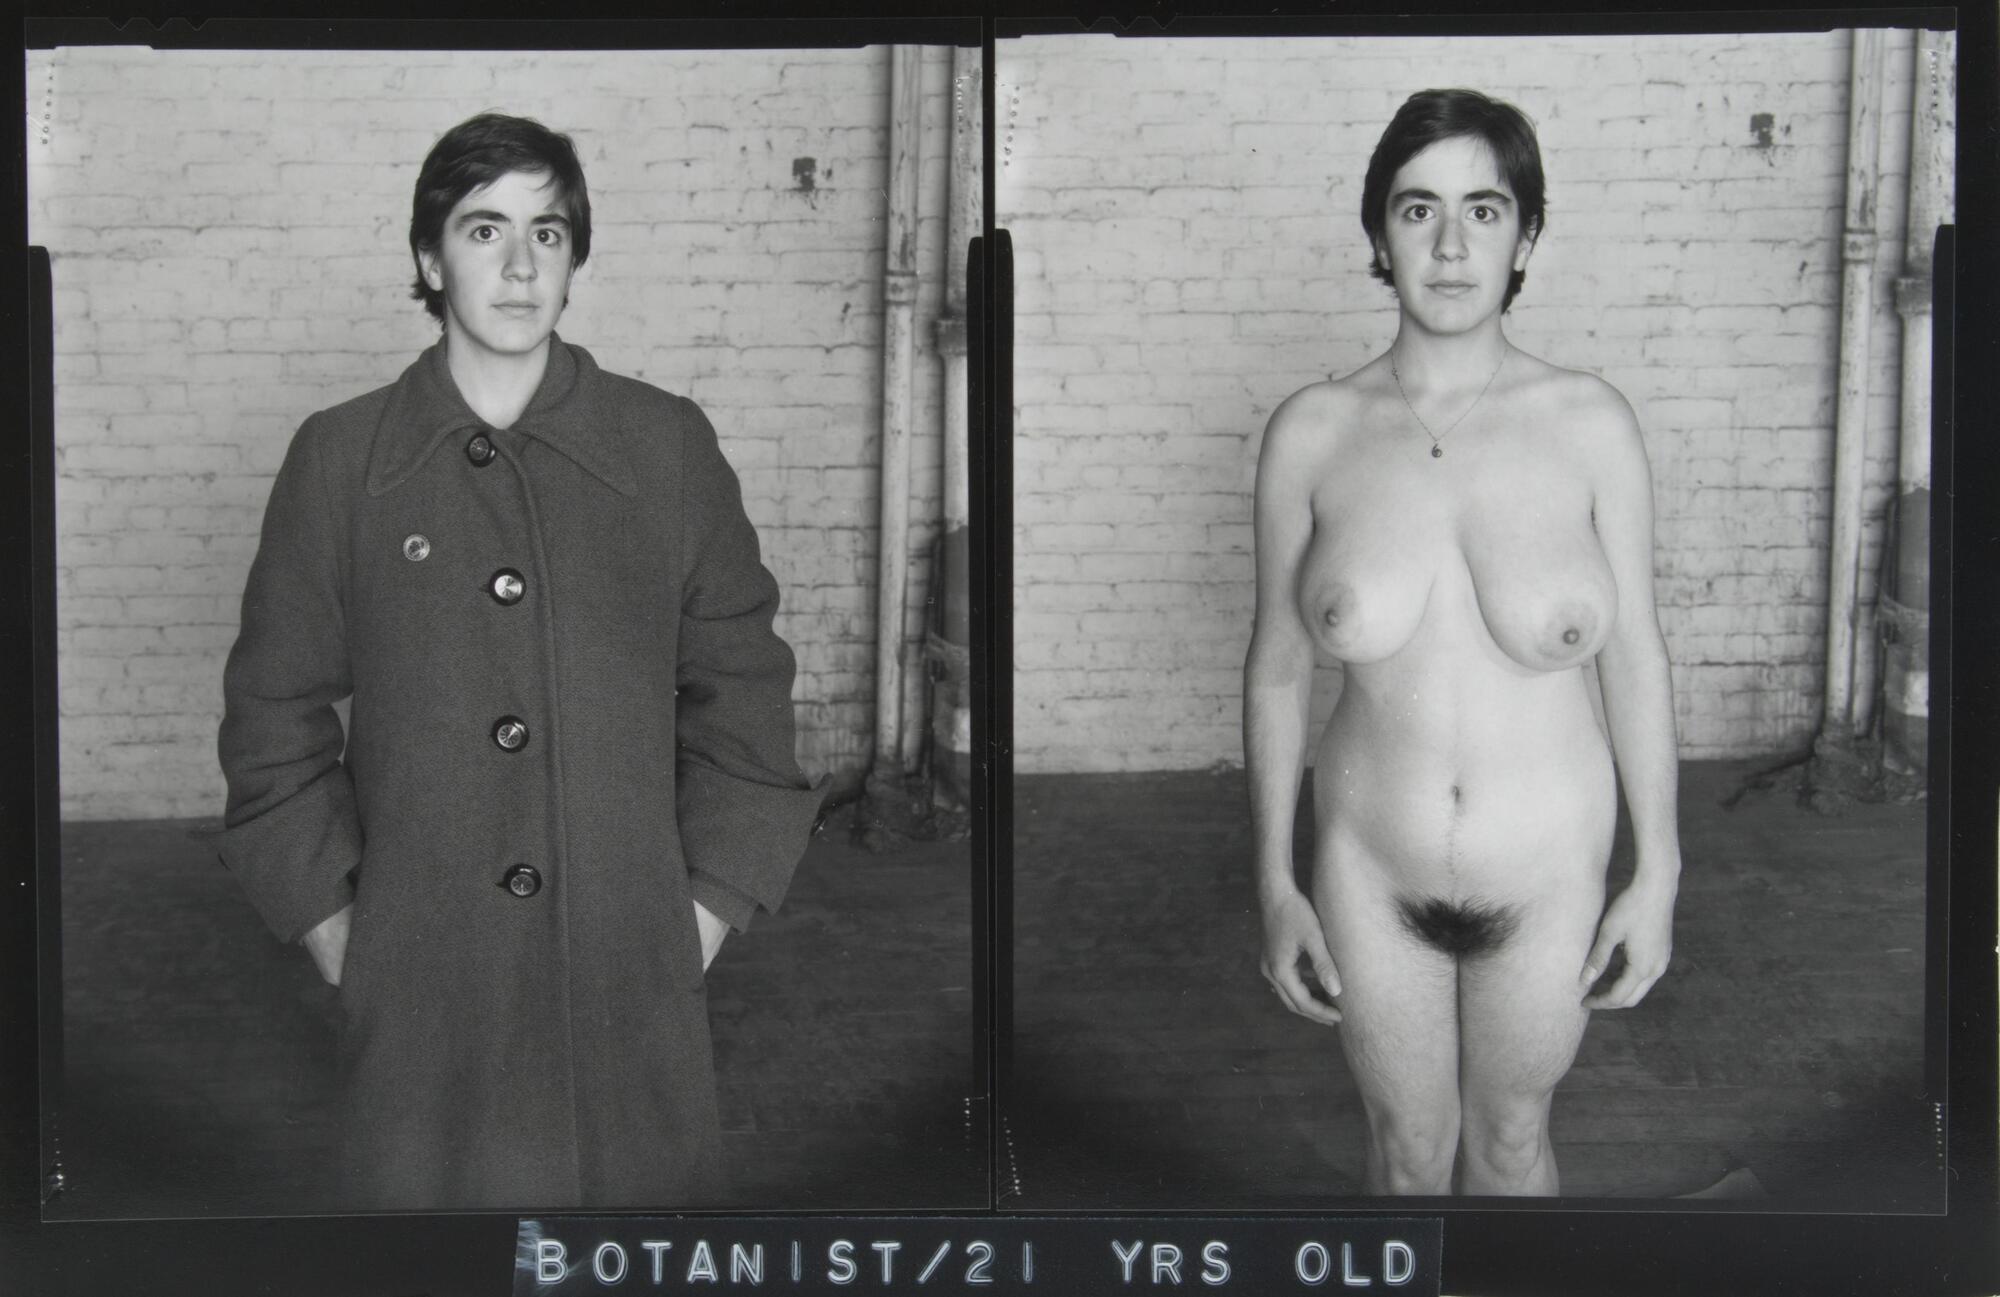 Side by side images of the same woman. On the left, she is wearing a long coat. On the right, she is nude.